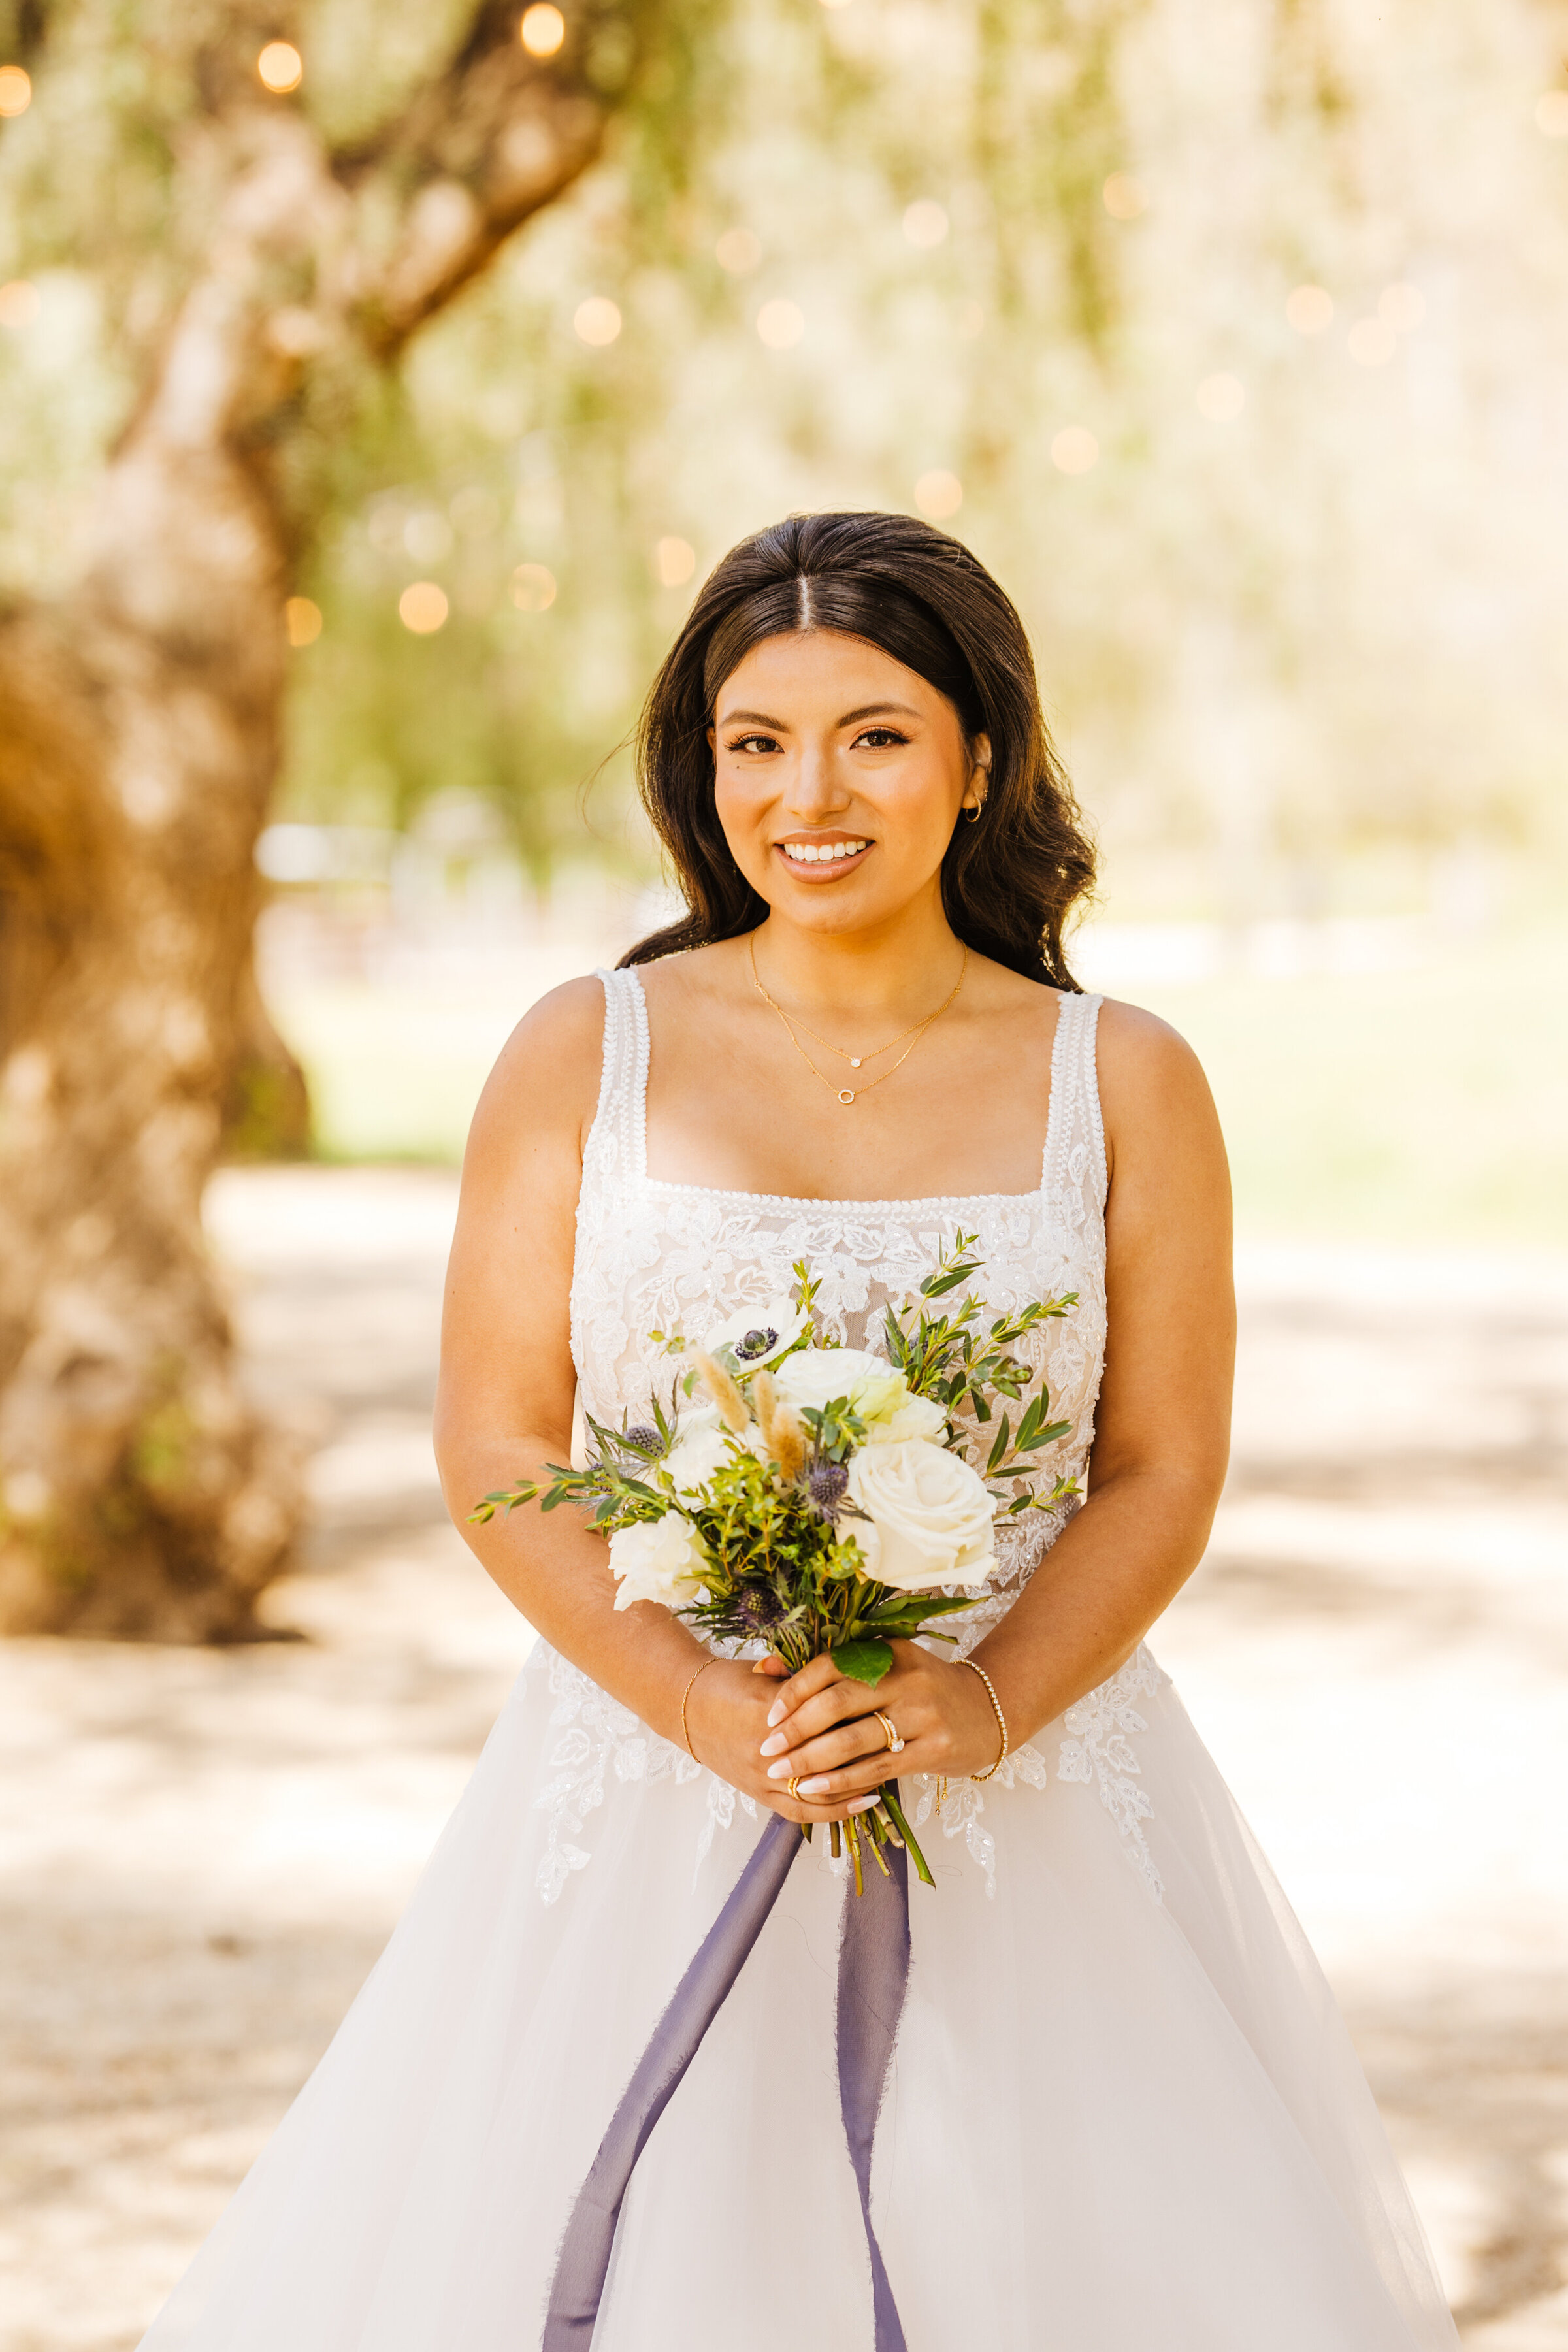 A woman in a white wedding dress holding a bouquet of flowers.